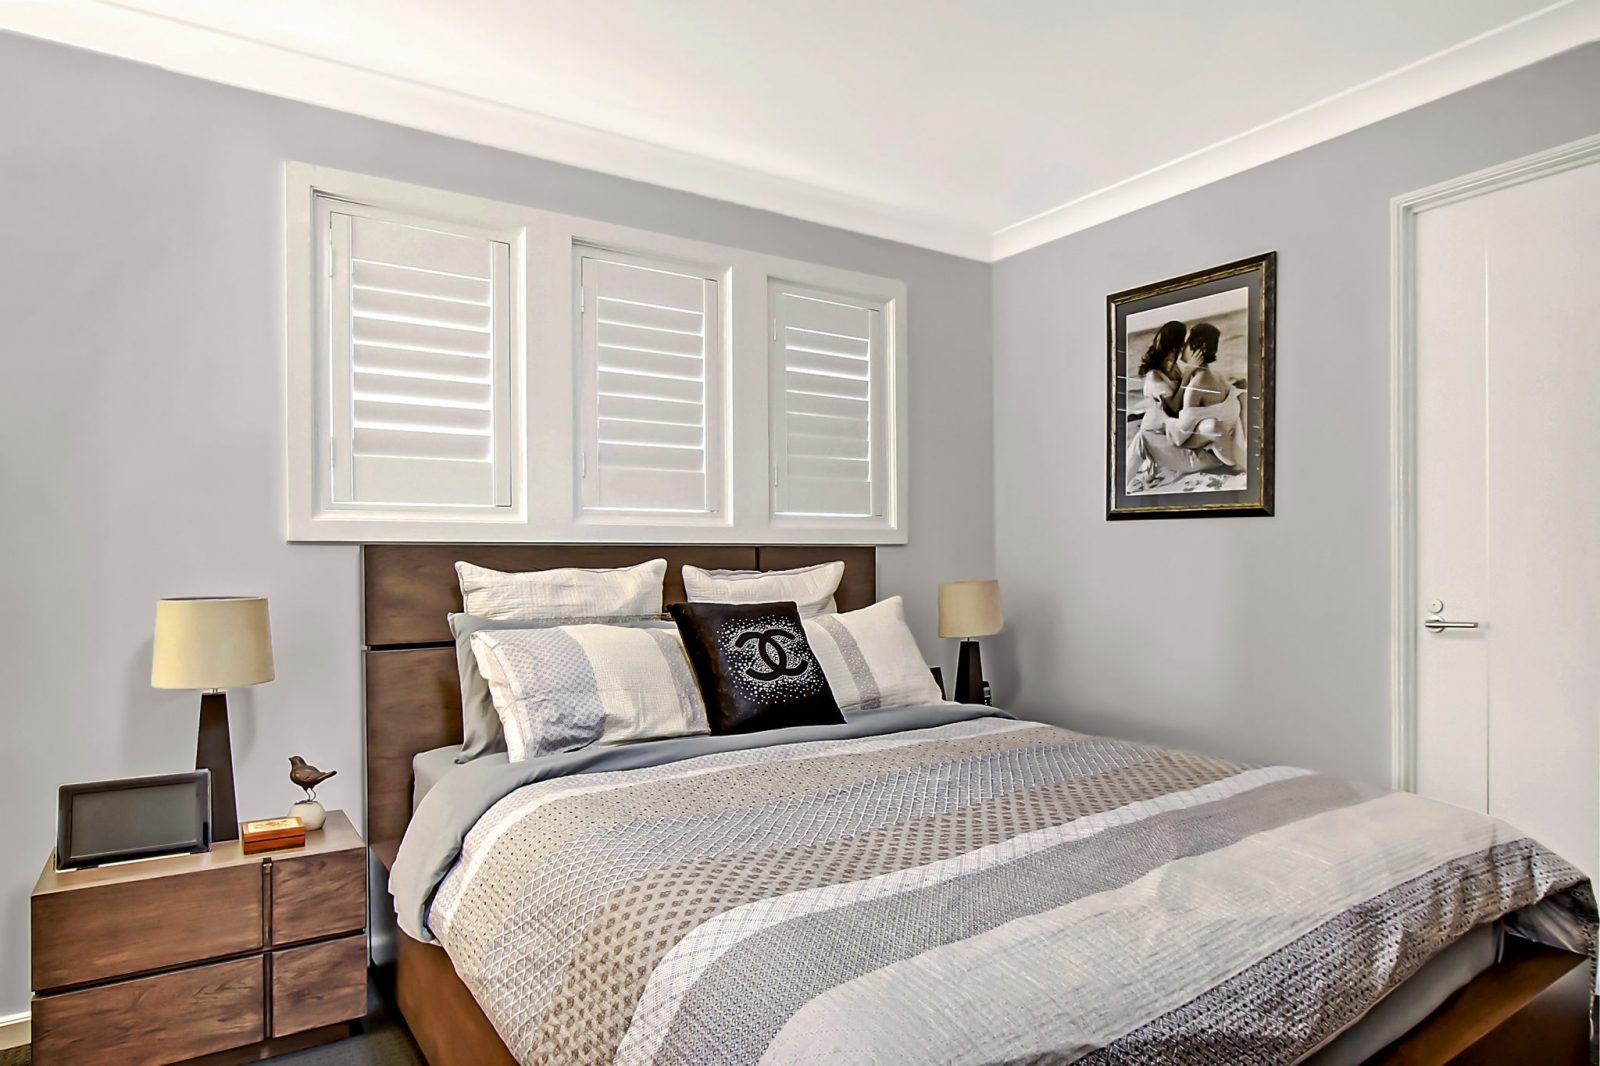 Plantation Shutters vs Curtains and Blinds – Which is Better?